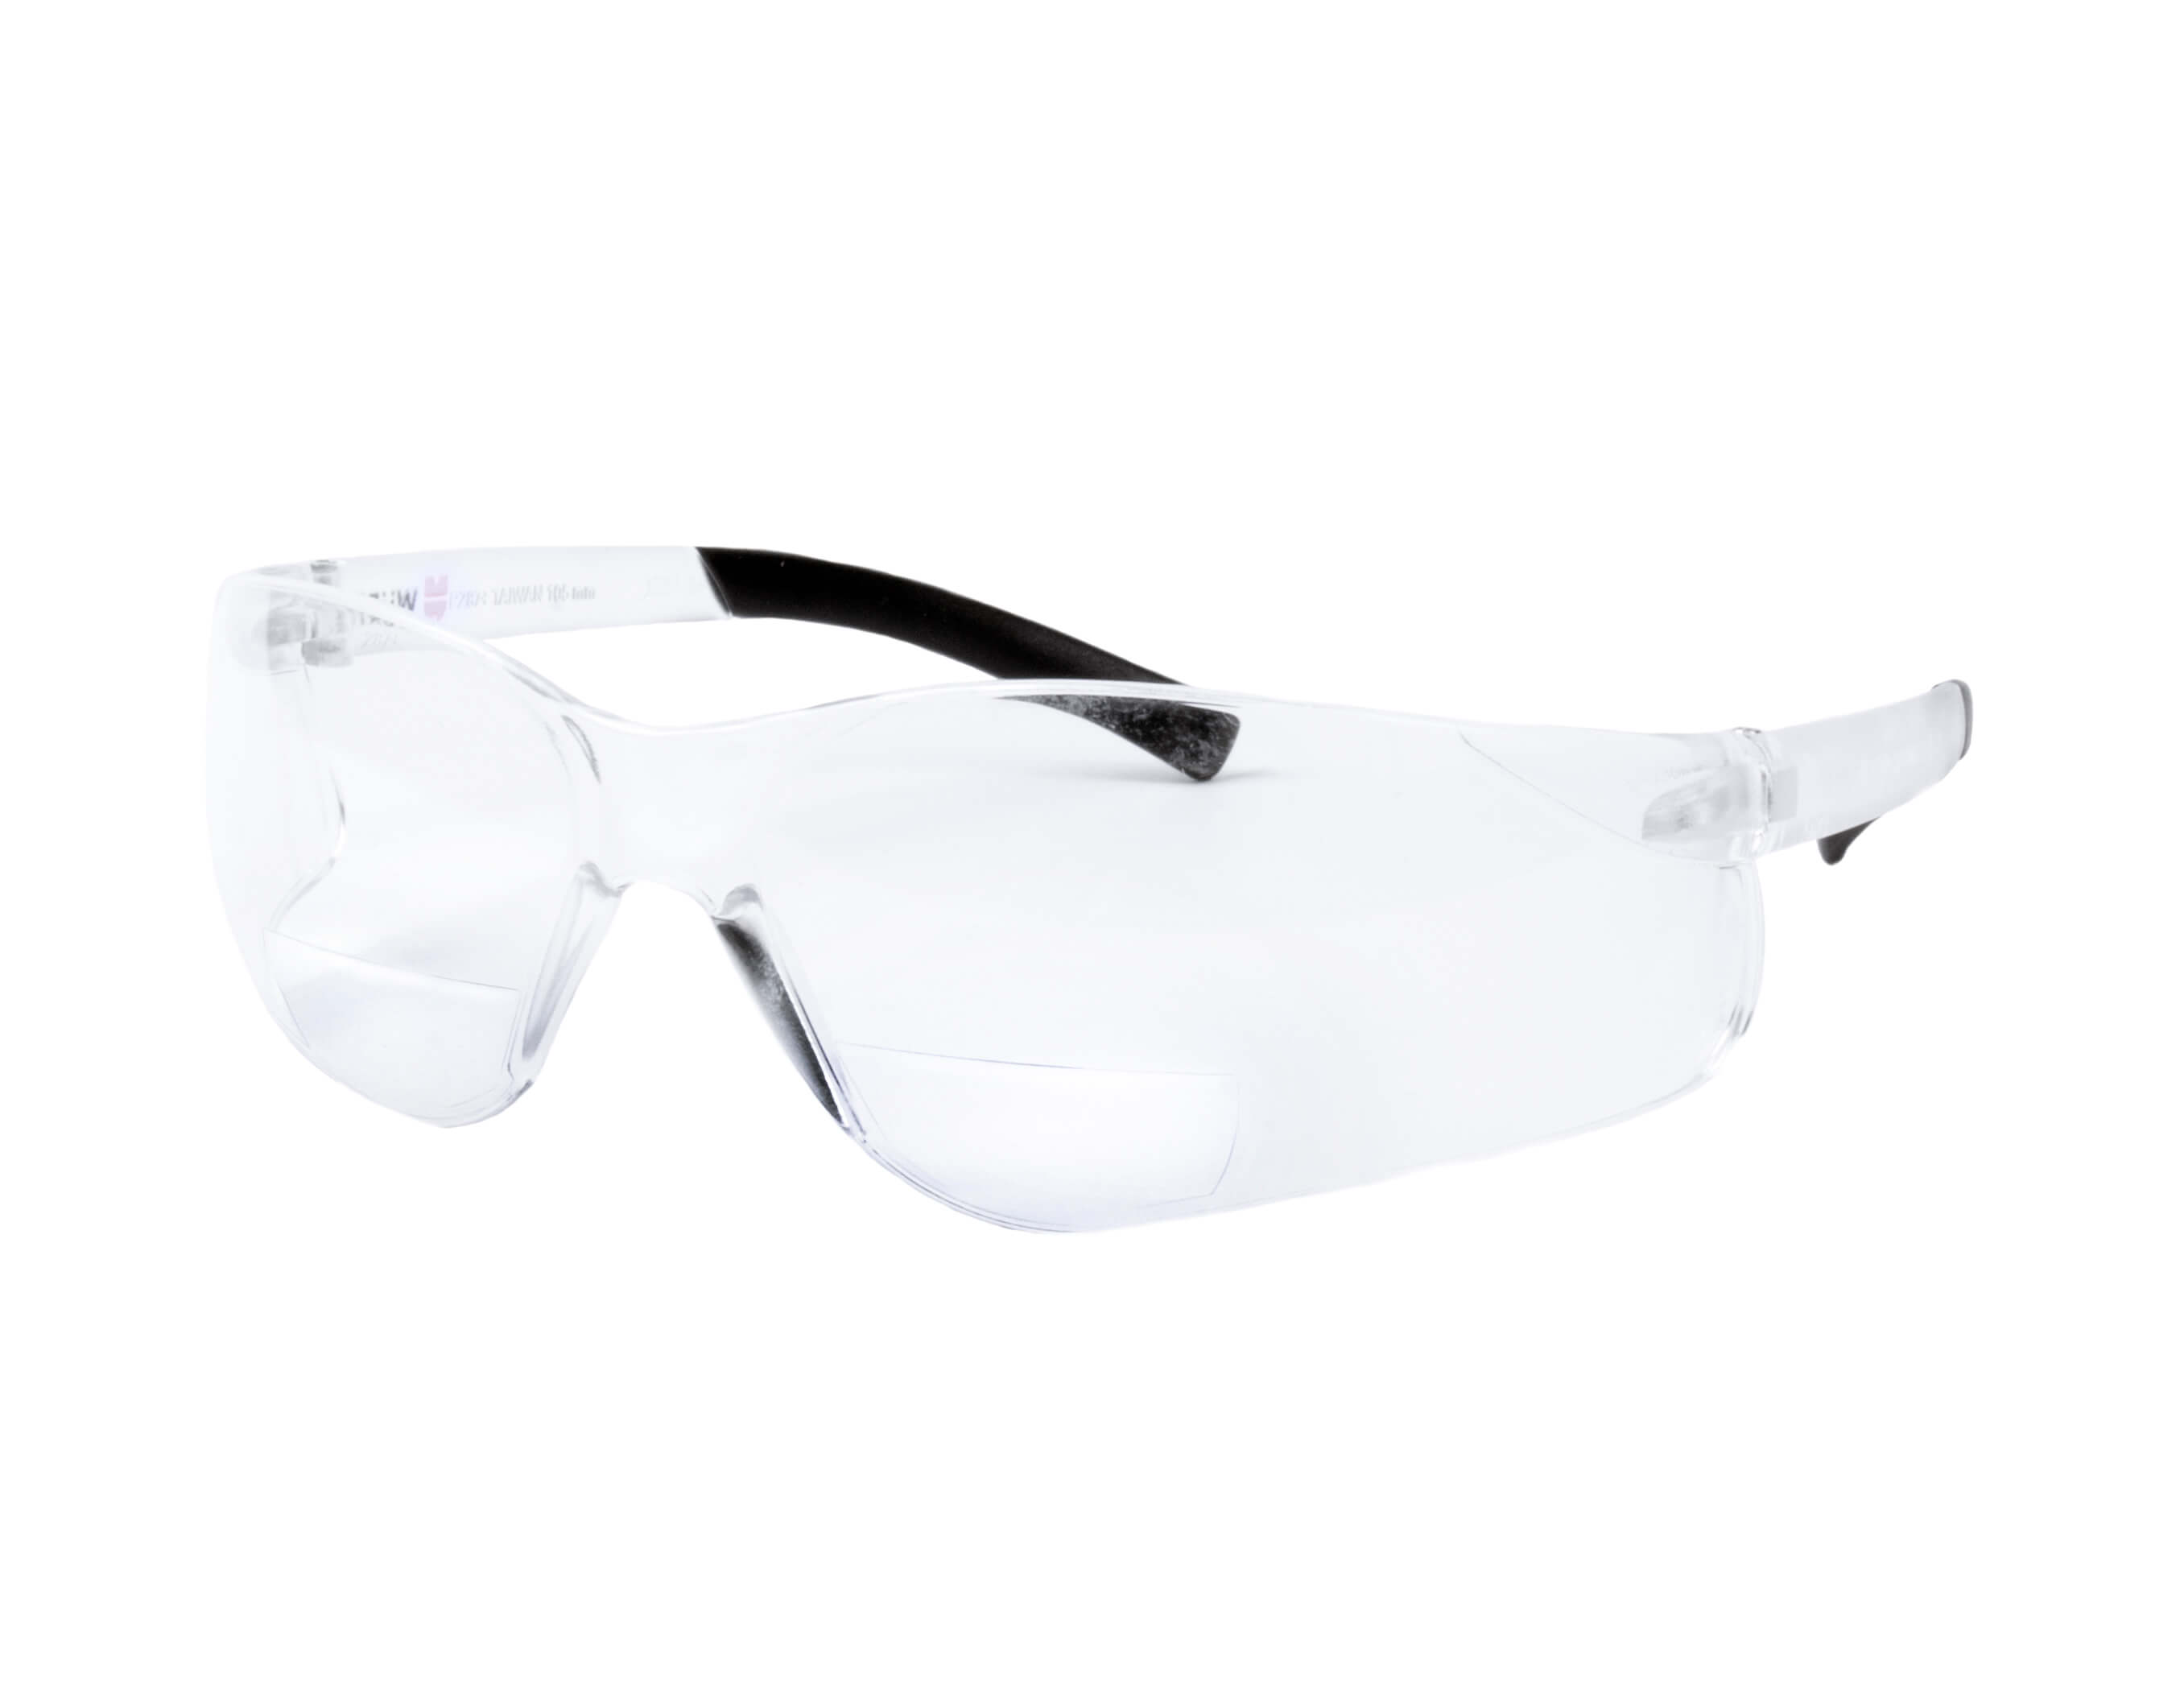 ARIES SAFETY GLASSES - BLK TMPL/CLEAR LENS 2.0